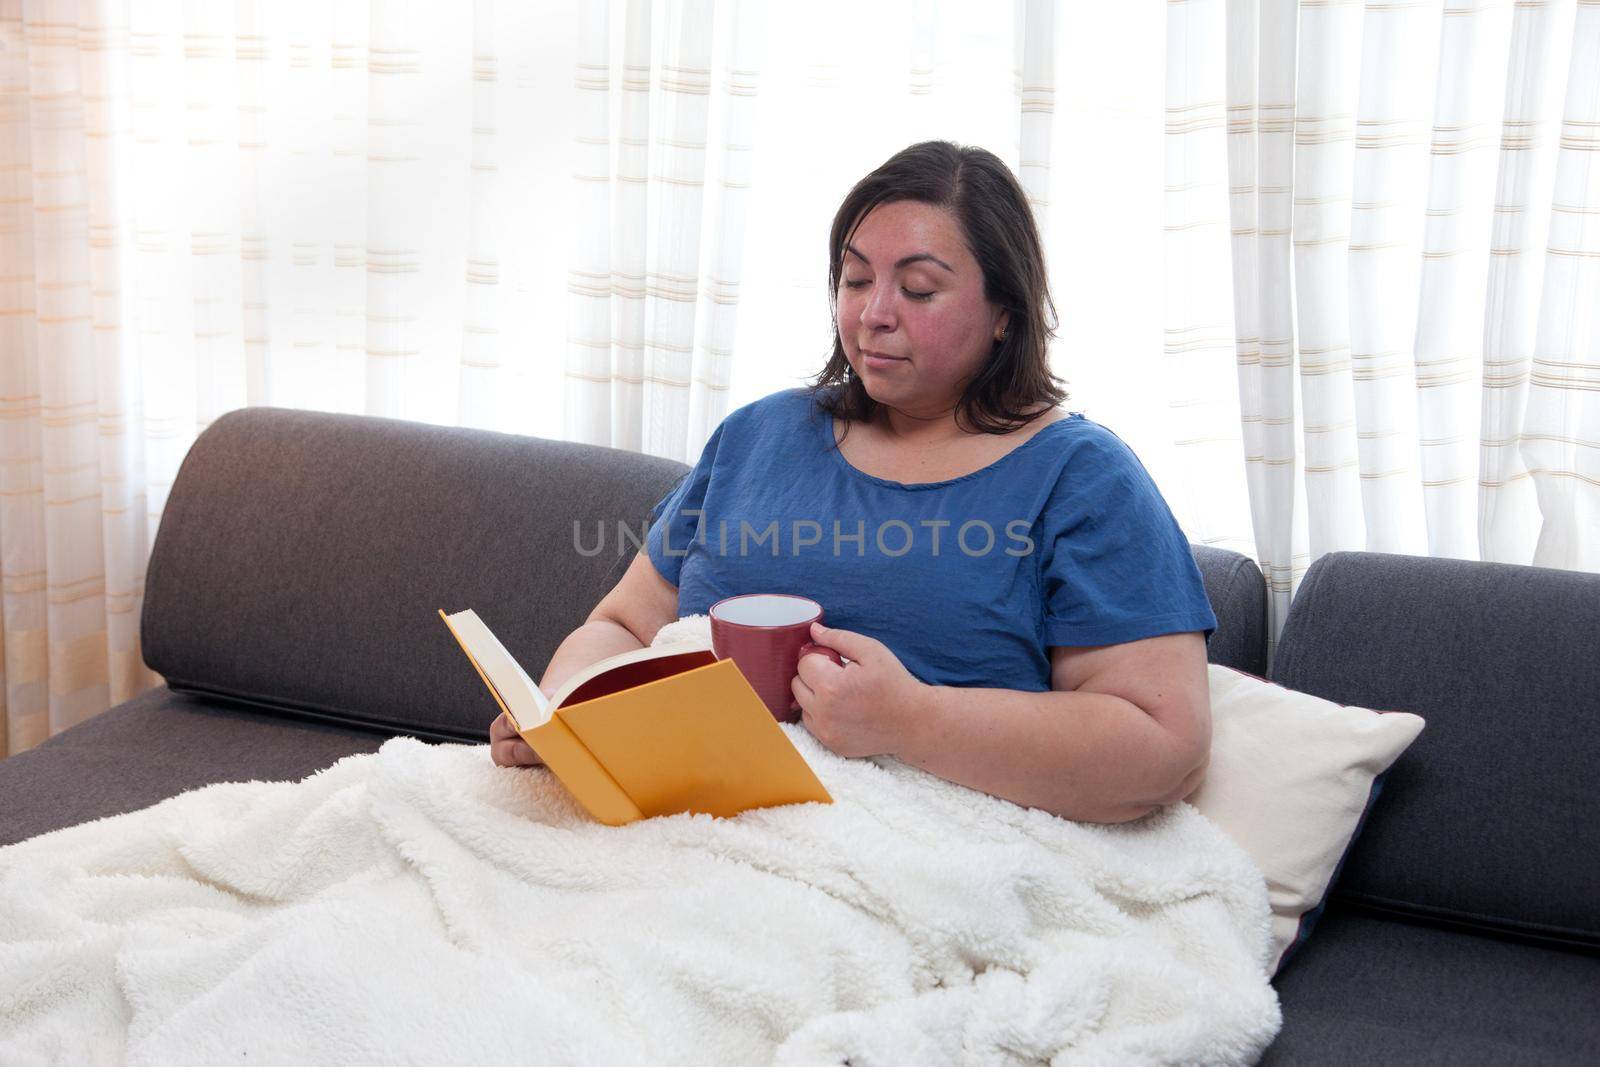 Person cuddled up on their couch with a book and mug, looking cozy and comfortable